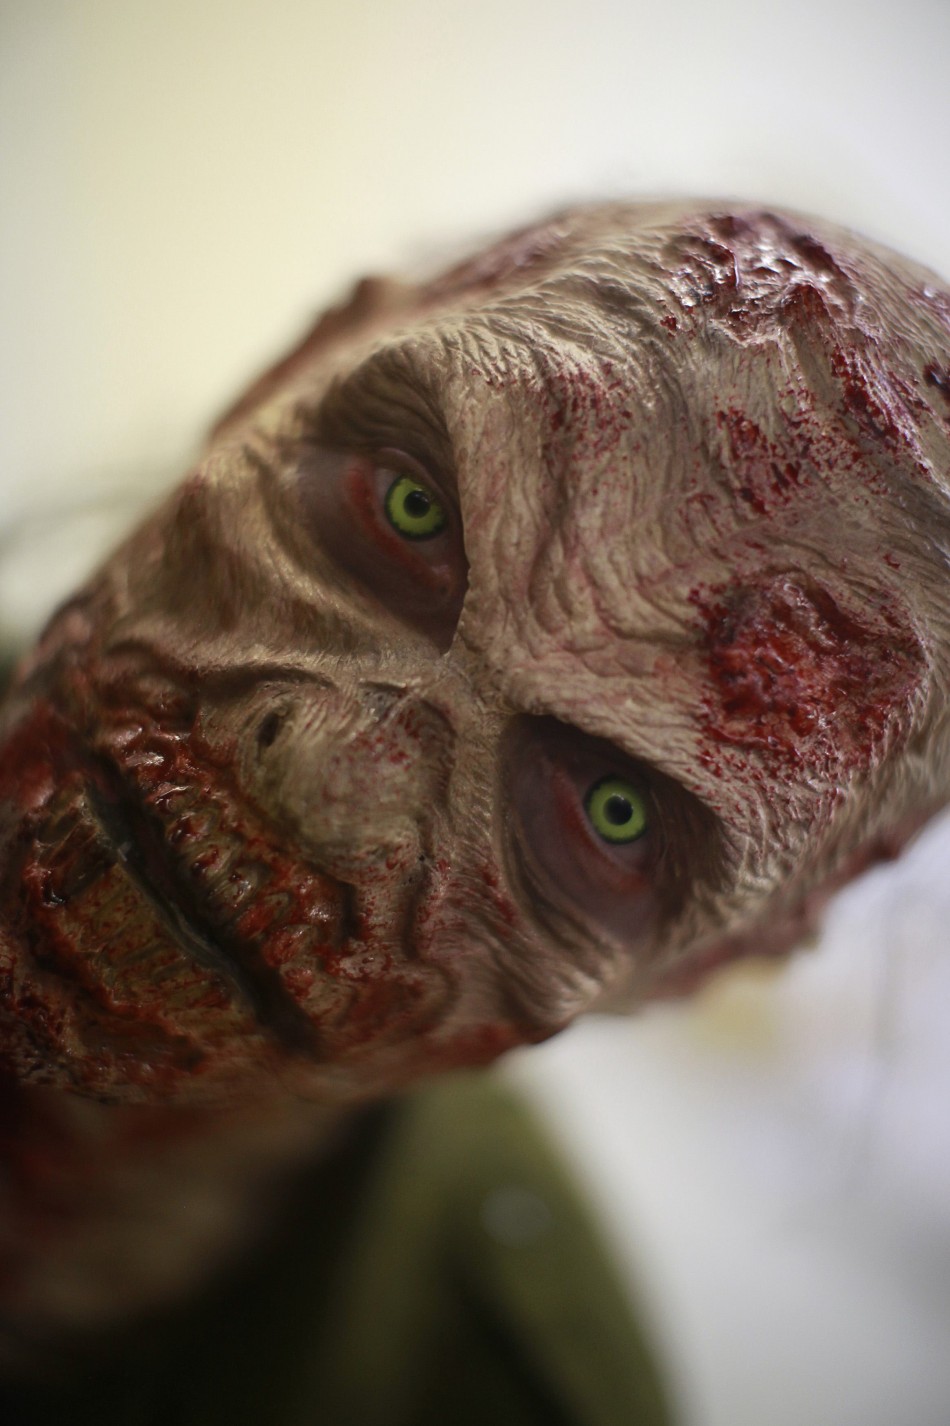 Zombie Apocalypse: US Army has Plan to Stop Attacks by the Undead